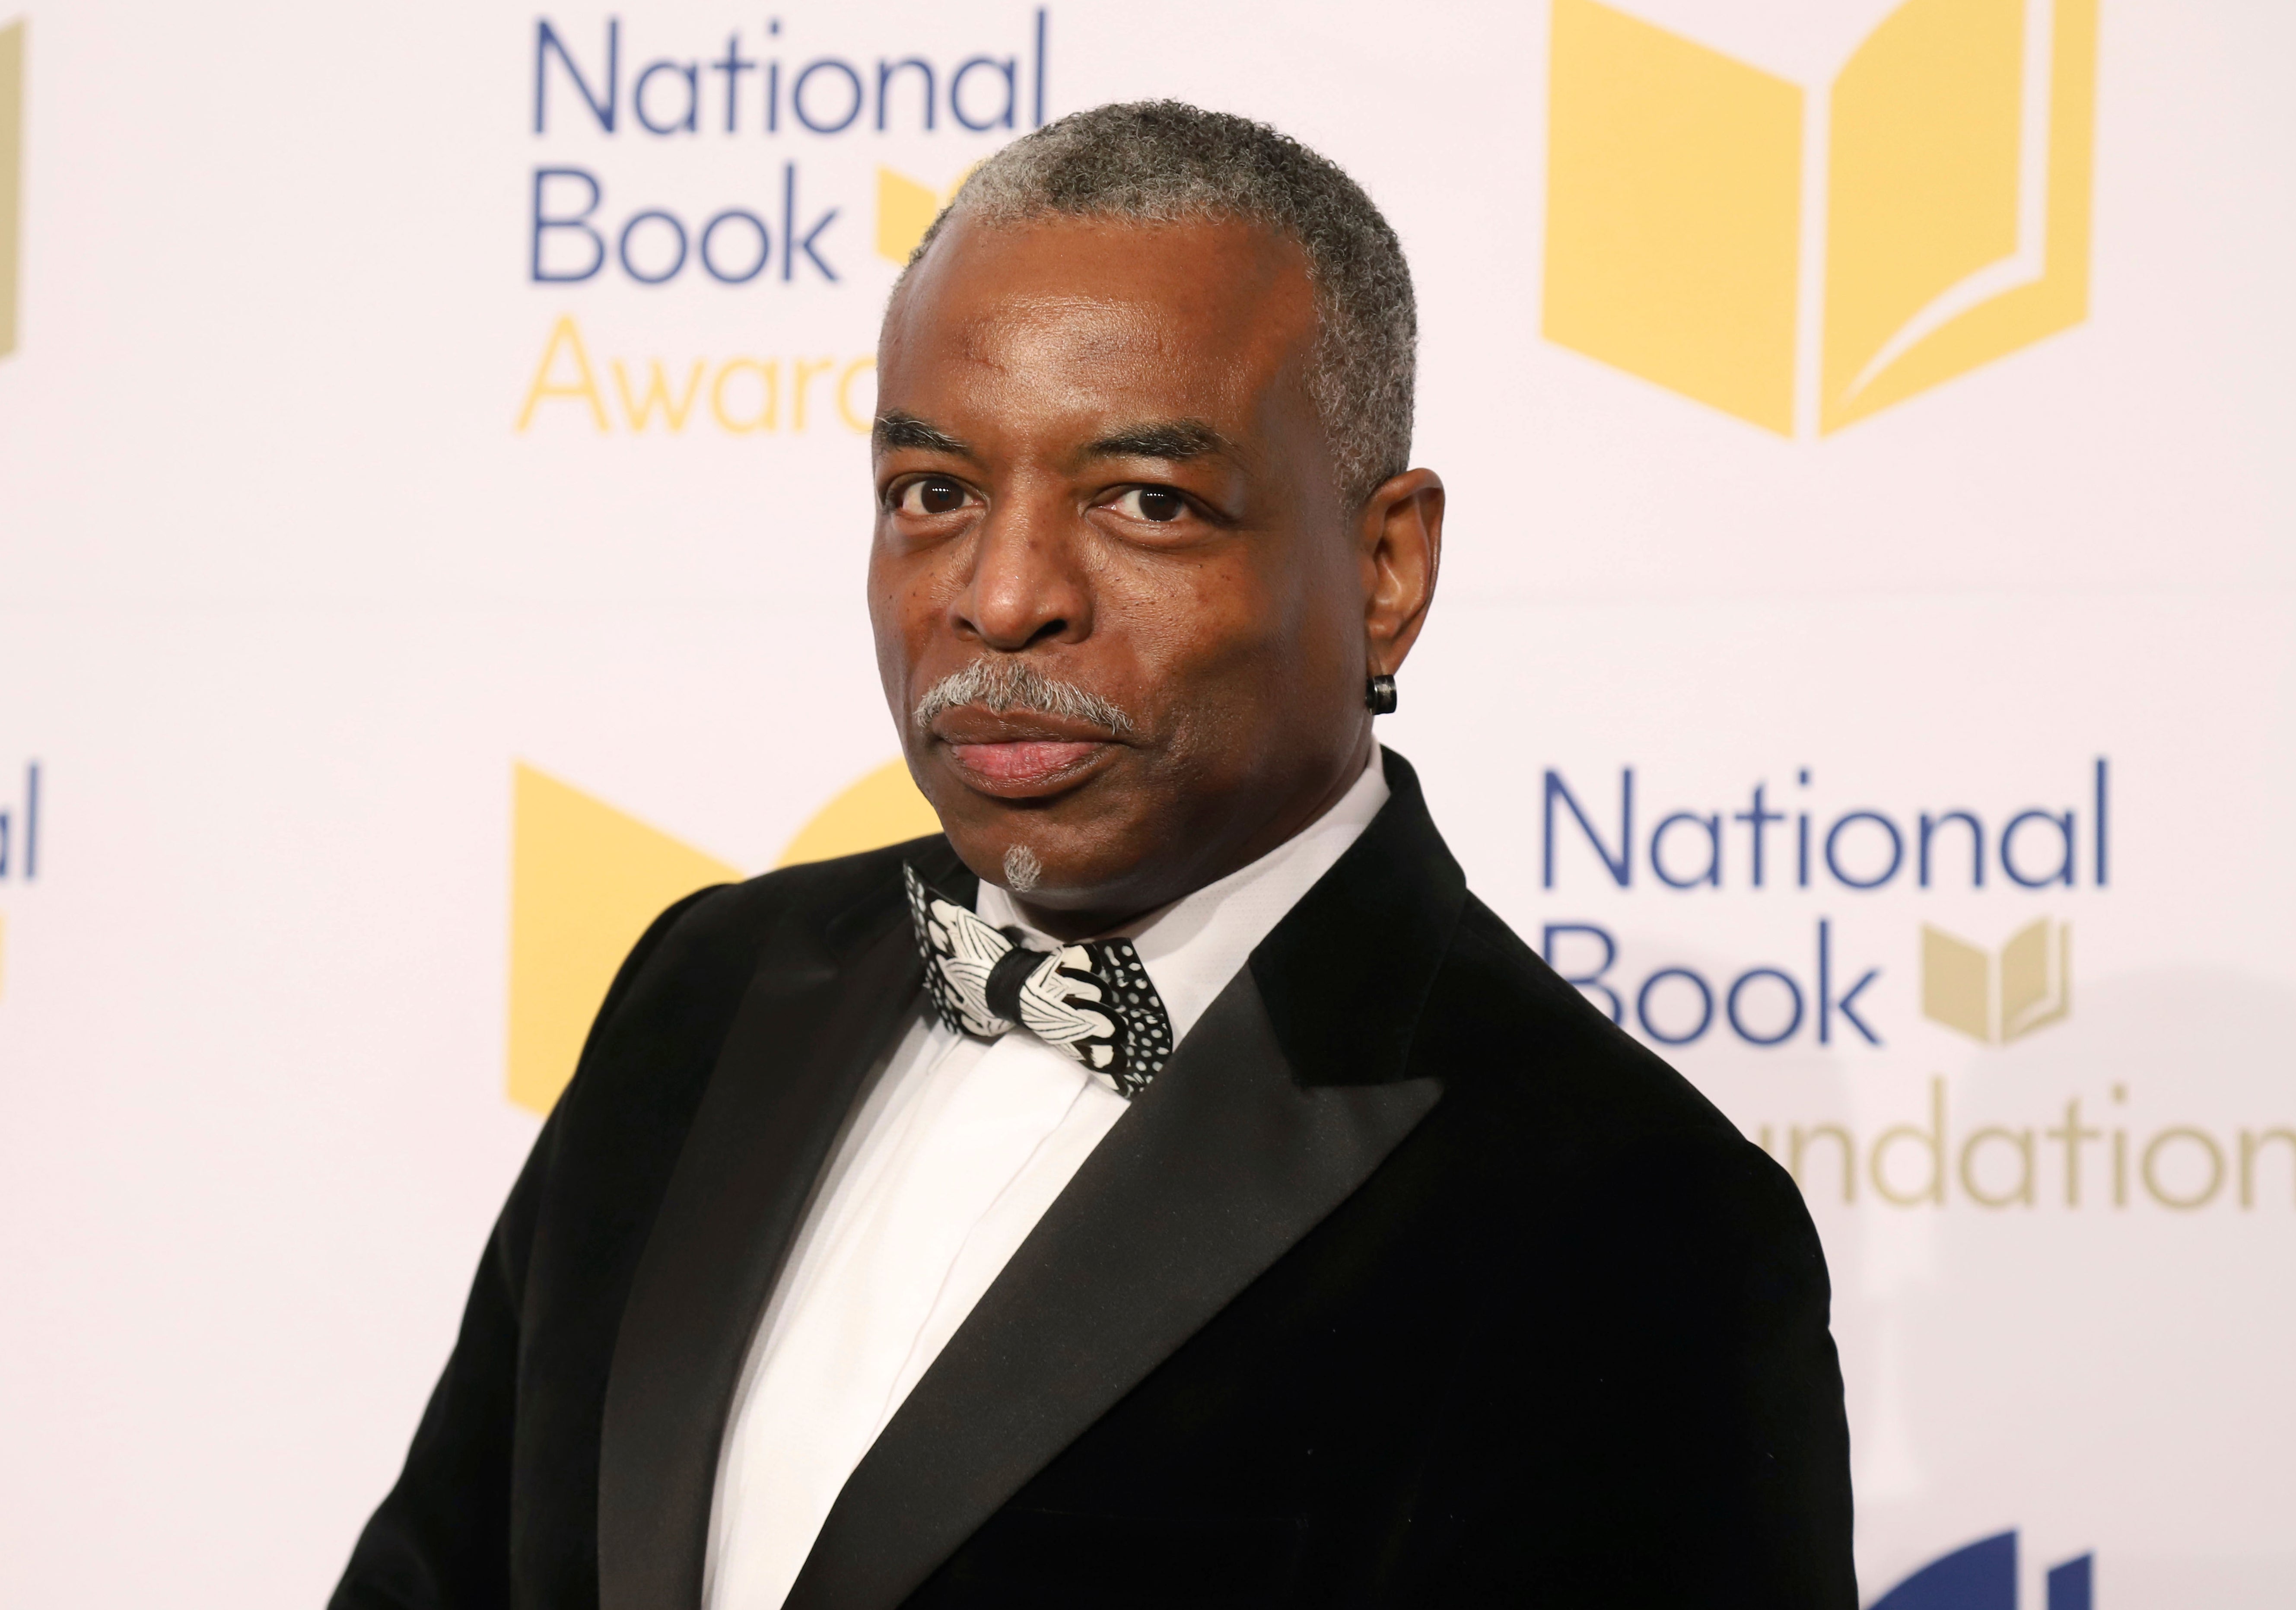 The ‘Reading Rainbow’ star was ecstatic on Twitter